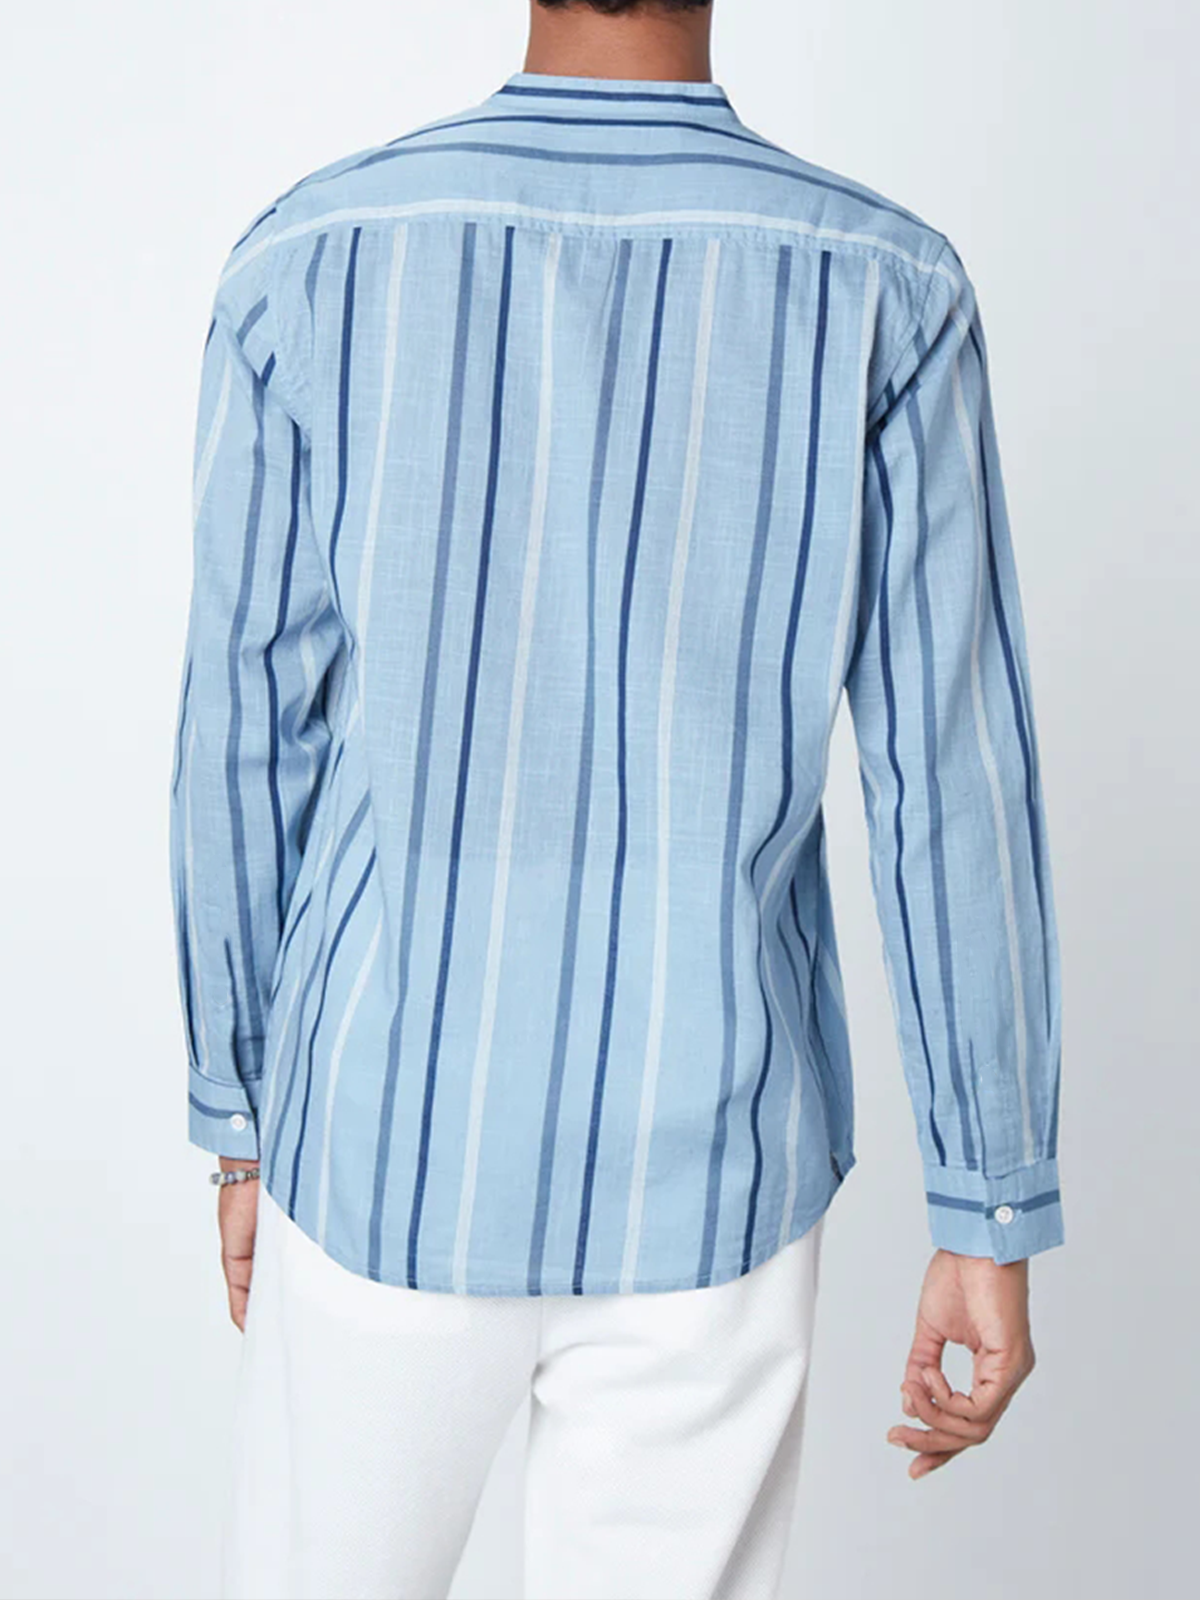 Hardaddy Striped Chest Pocket Long Sleeves Casual Shirt